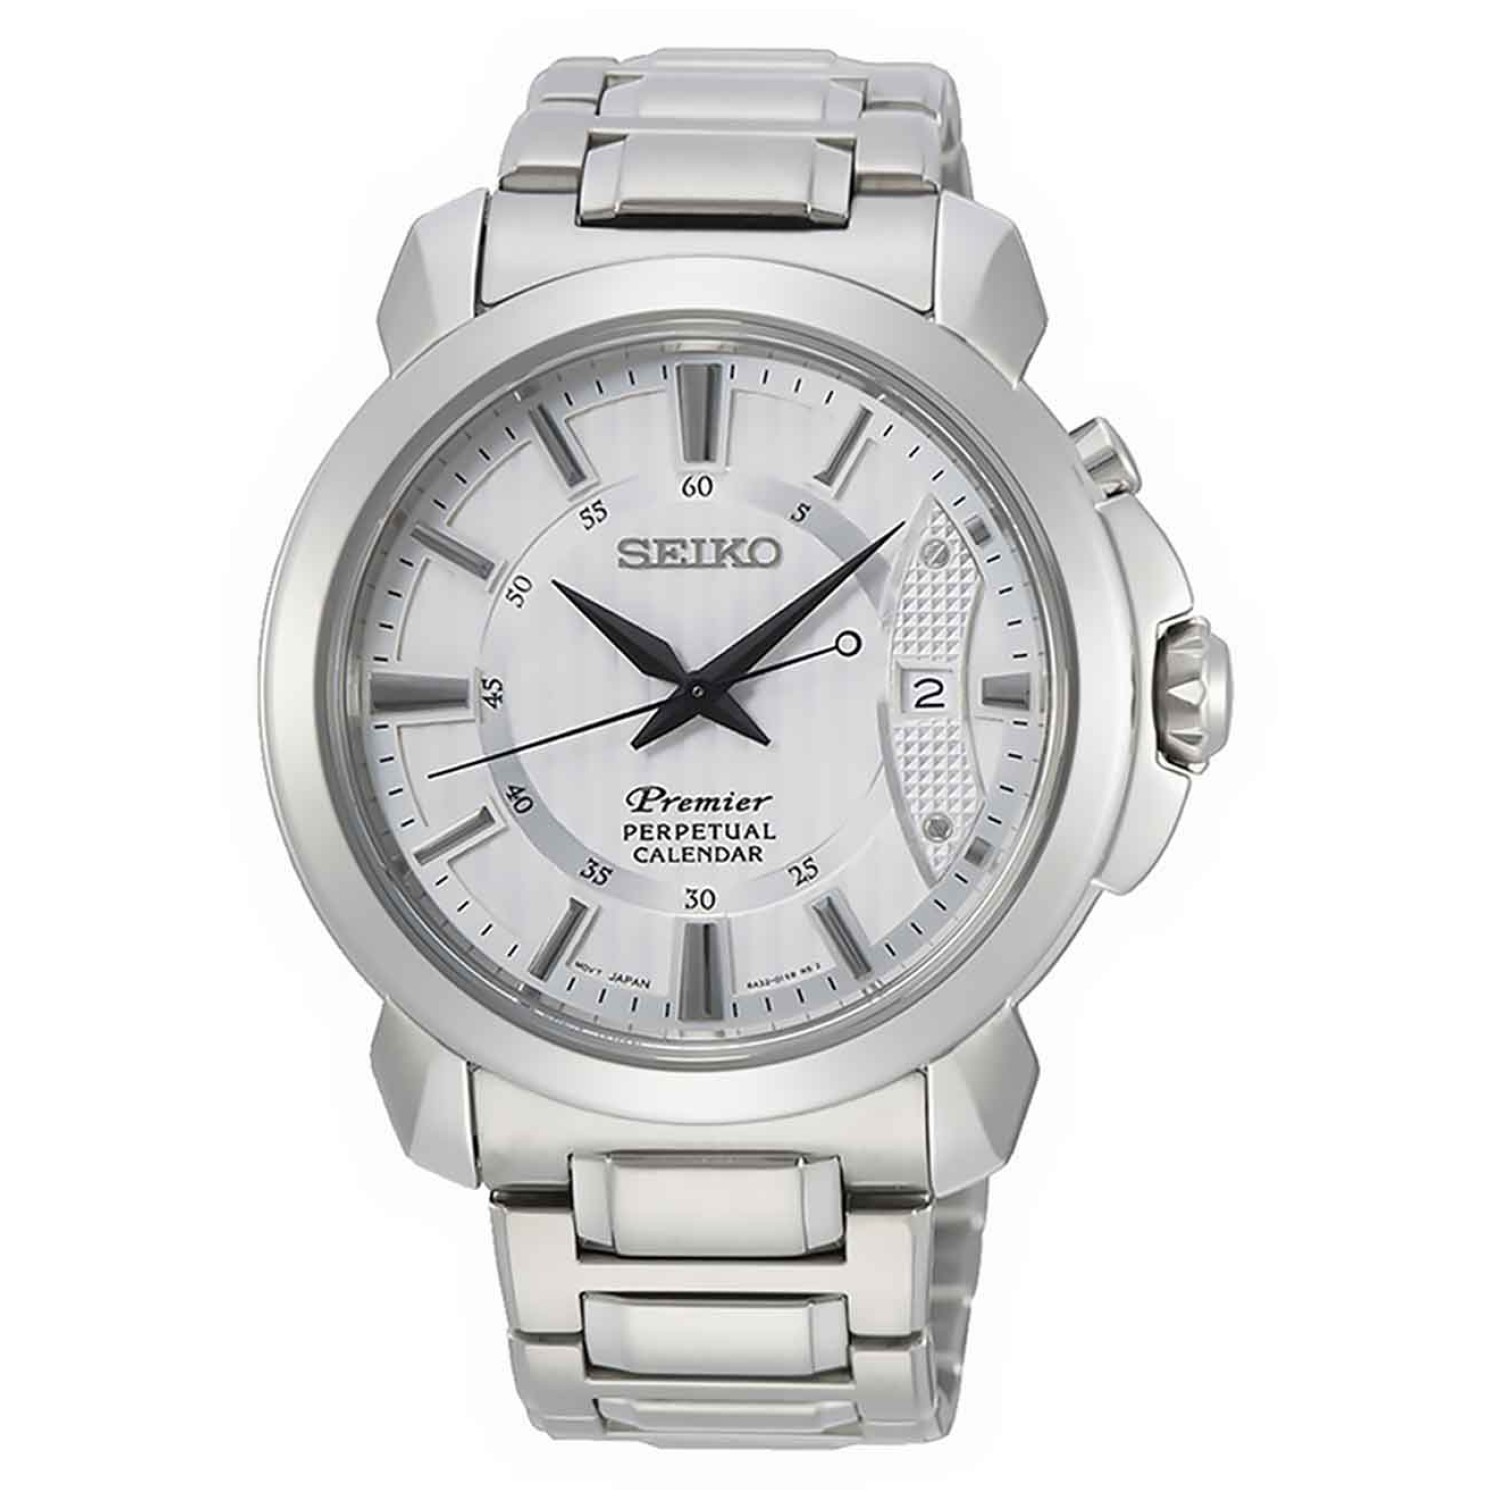 SNQ155P SEIKO Premier Perpetual Calendar Watch.   3 Months No Payments and Interest for Q Card holders LAYBUY - Pay it easy, in 6 weekly payments and have it now. Only pay the price of your purchase, when you pay your instalments on time. A late fee may @